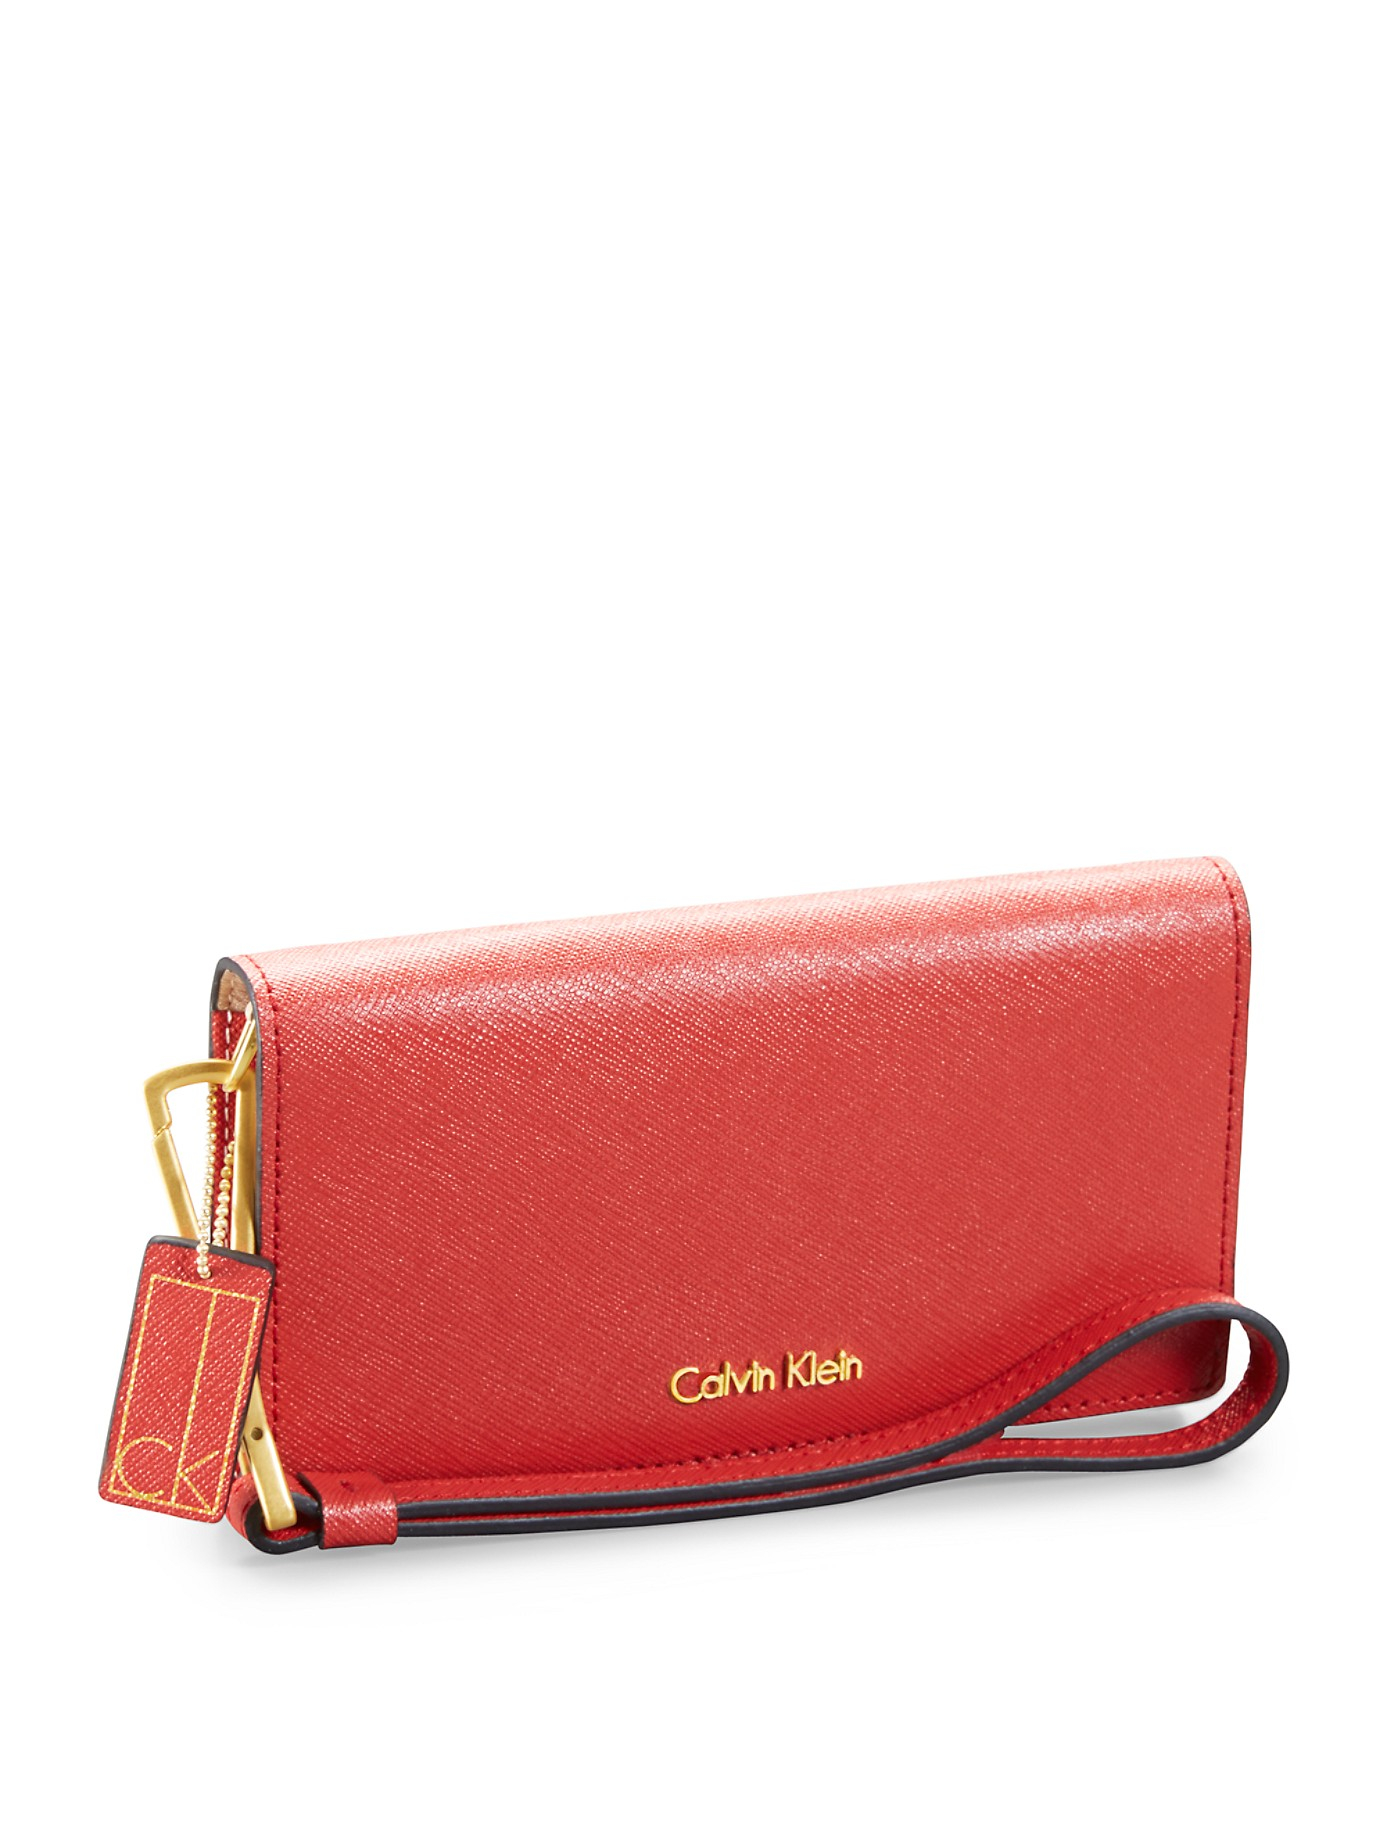 Lyst - Calvin Klein White Label Galey Saffiano Leather Wrist Wallet in Red